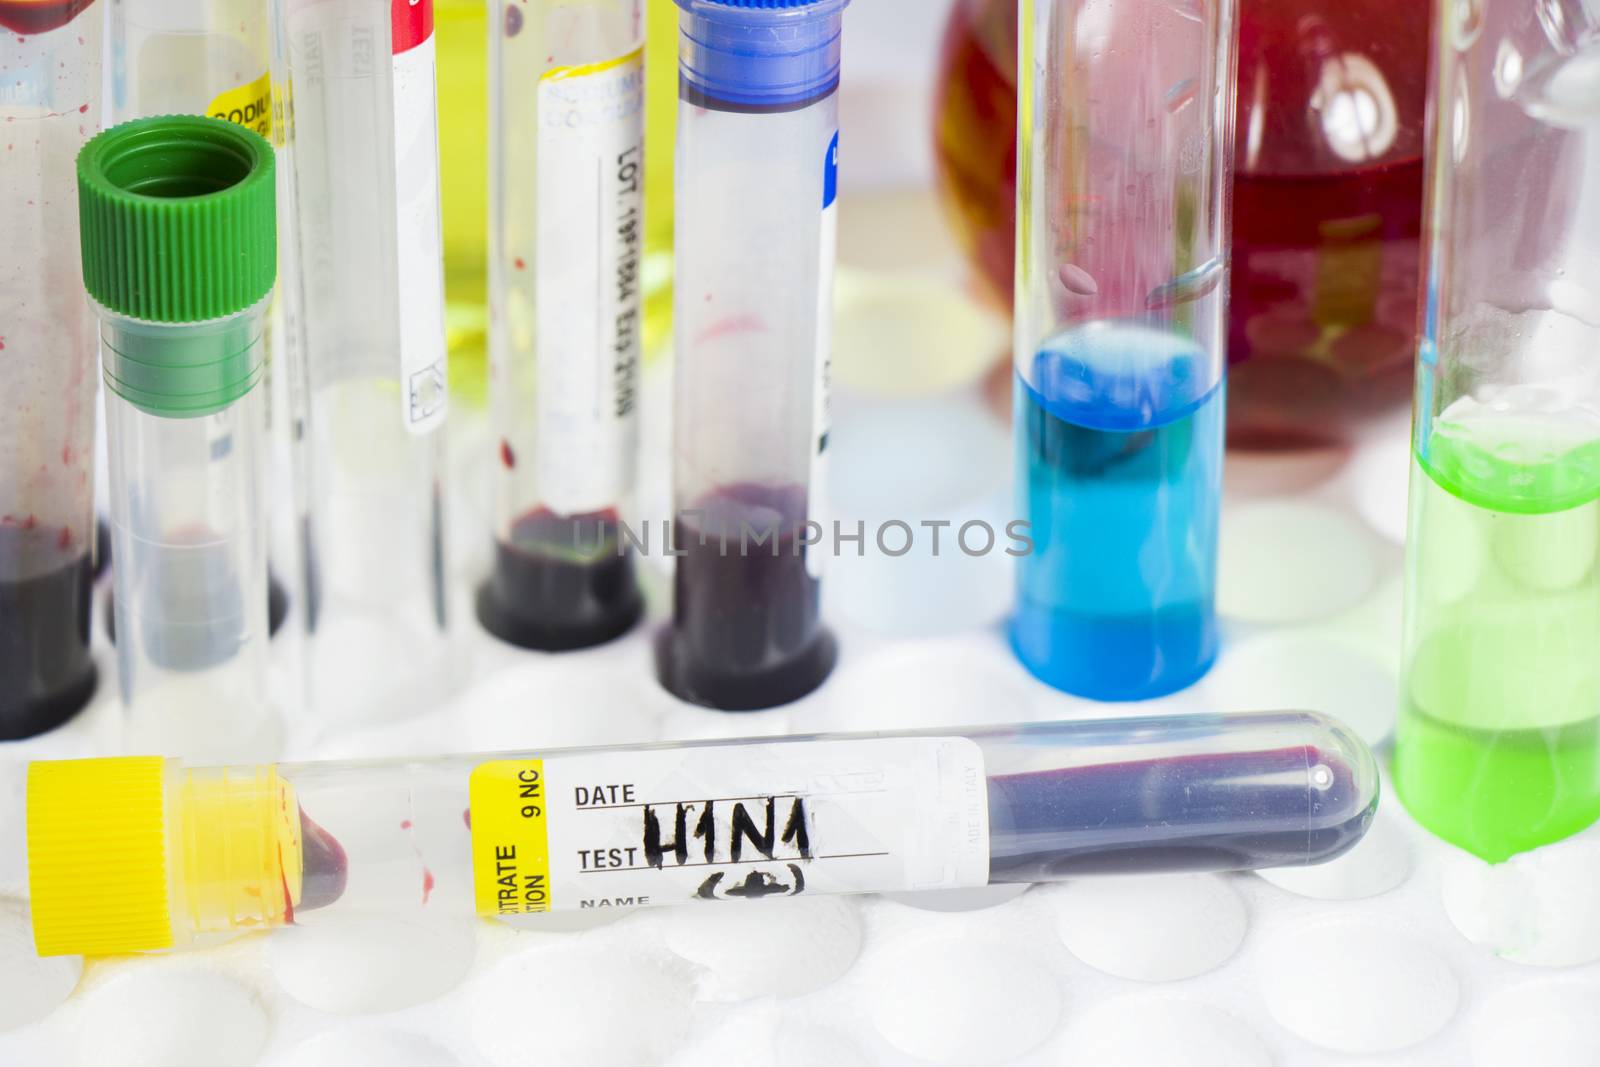 H1N1 swine influenza, diagnoses and lab tests, blood test tube samples, text and letter. by Taidundua